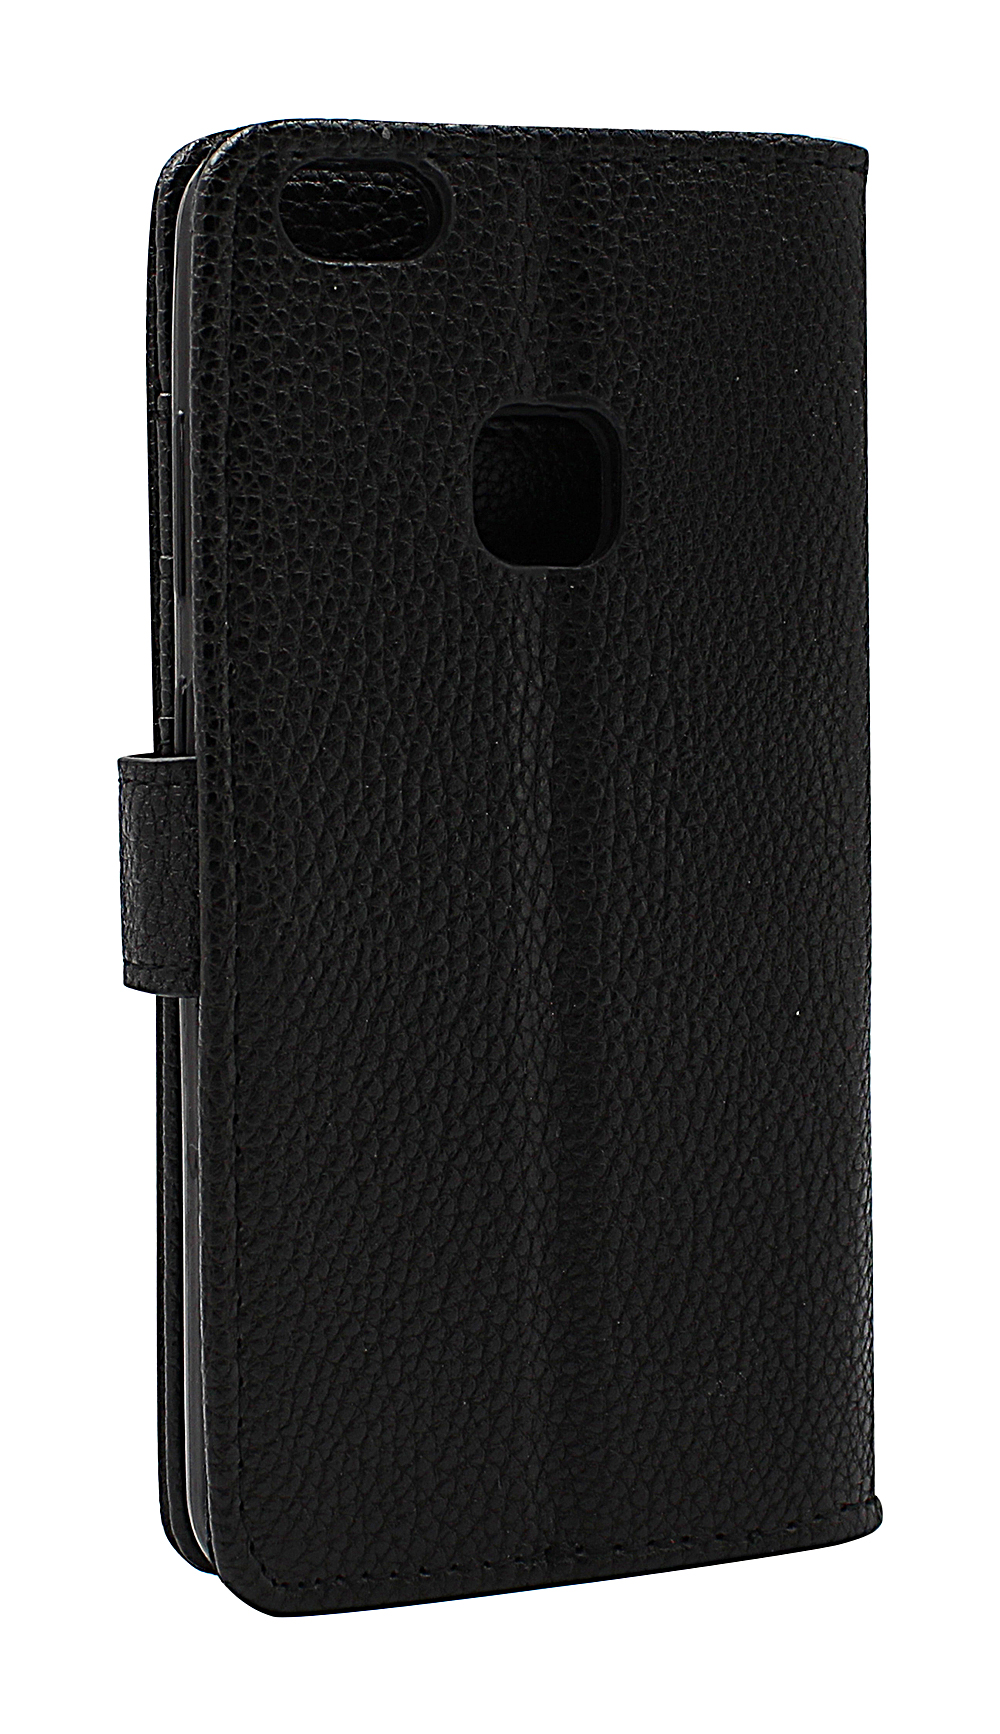 New Standcase Wallet Huawei P10 Lite